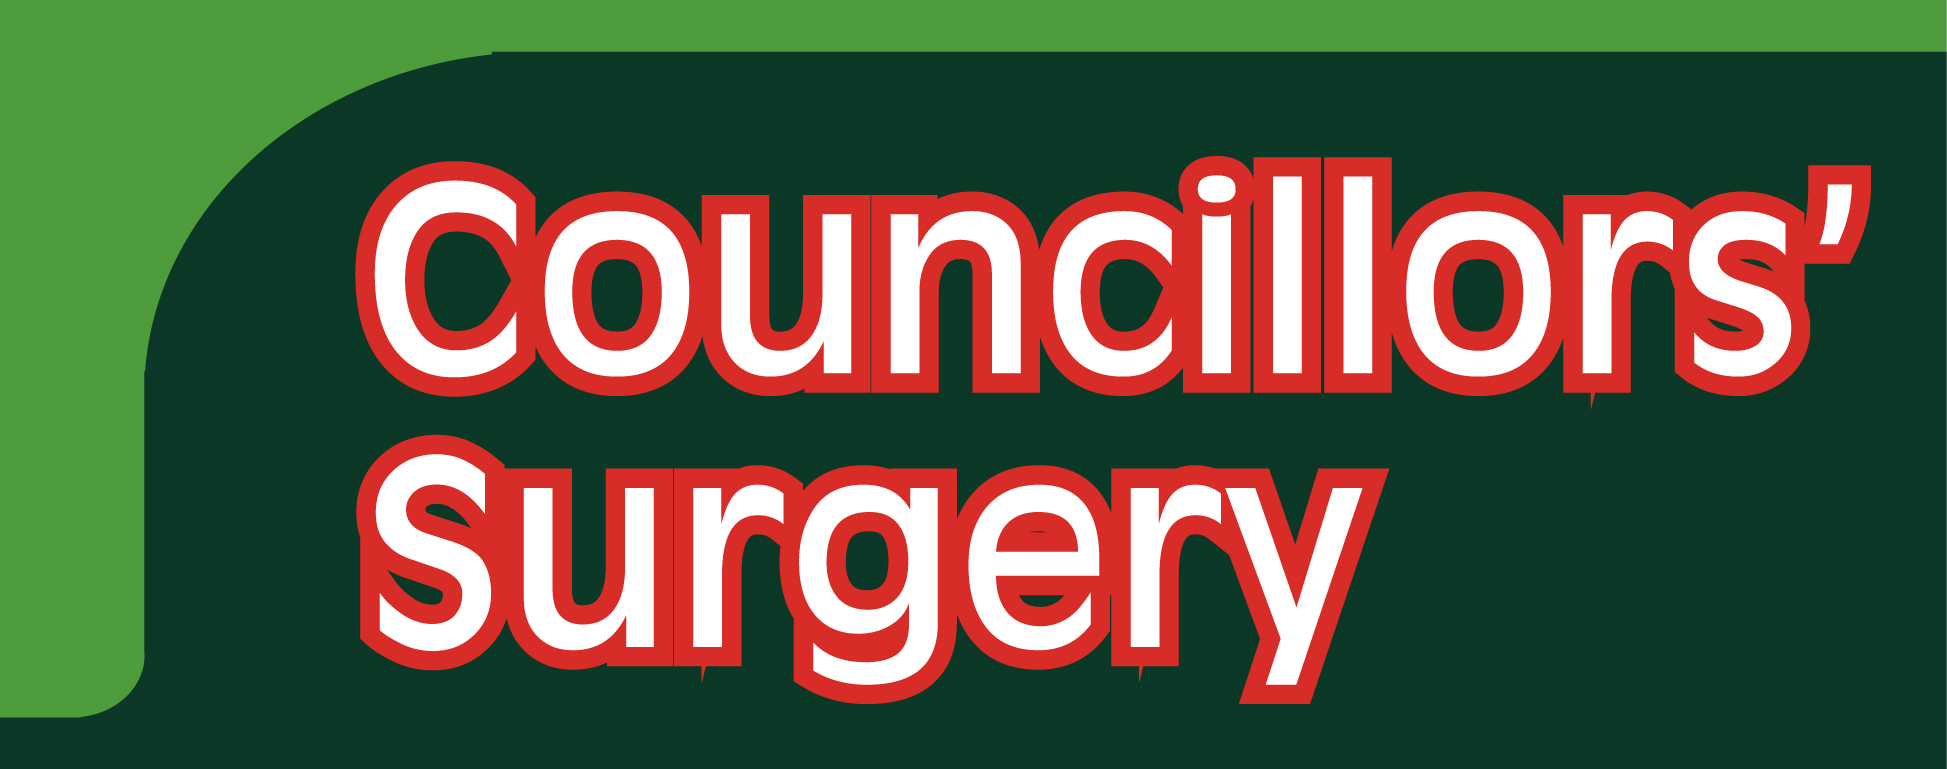 Councillors’ Surgeries -Shafto, Central and Neville Ward